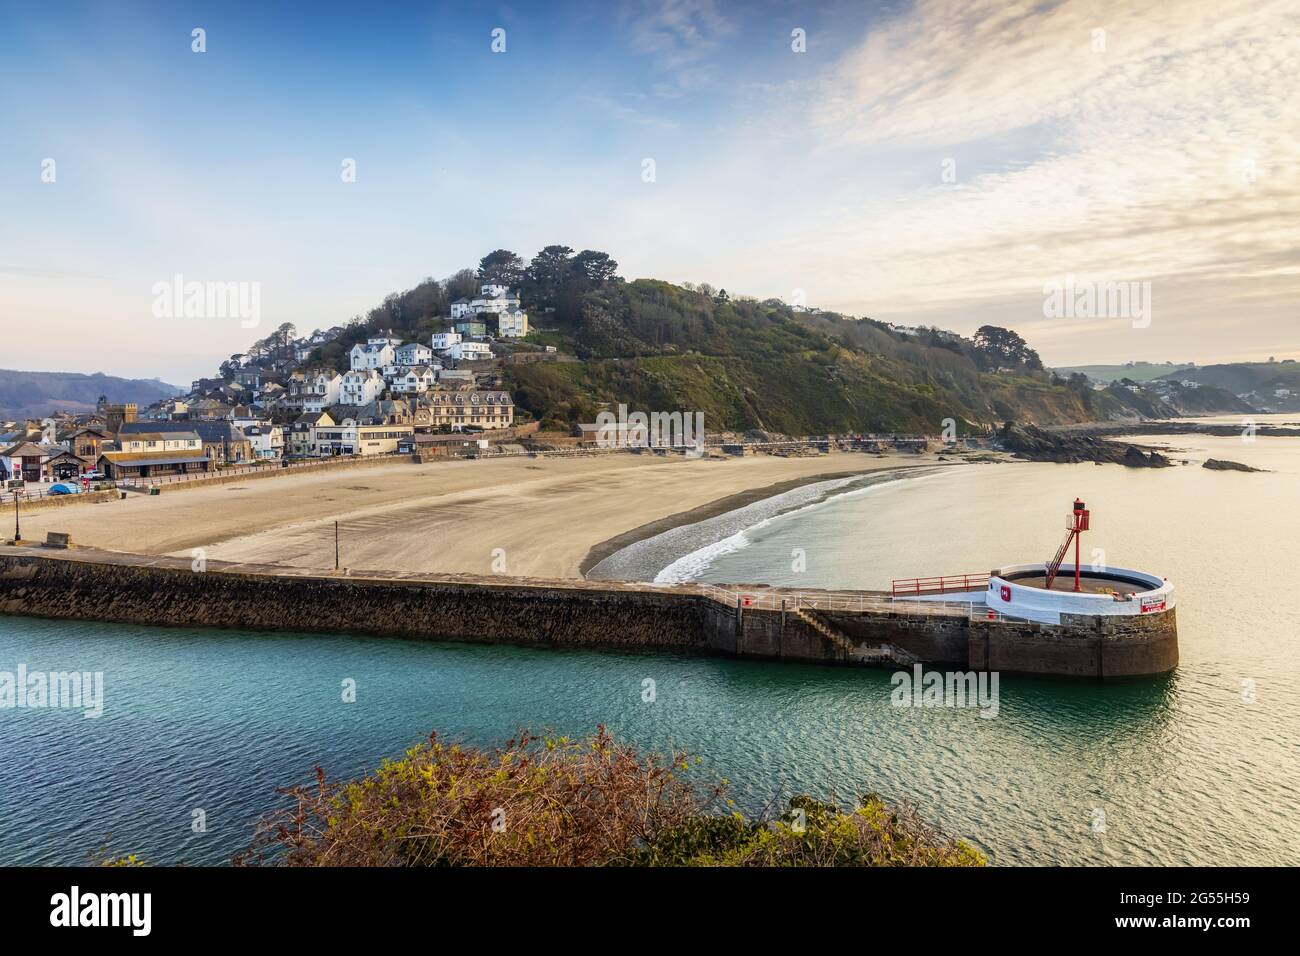 The Banjo Pier, named because of its banjo shape, and beach at Looe in Cornwall, taken shortly after sunrise. Stock Photo